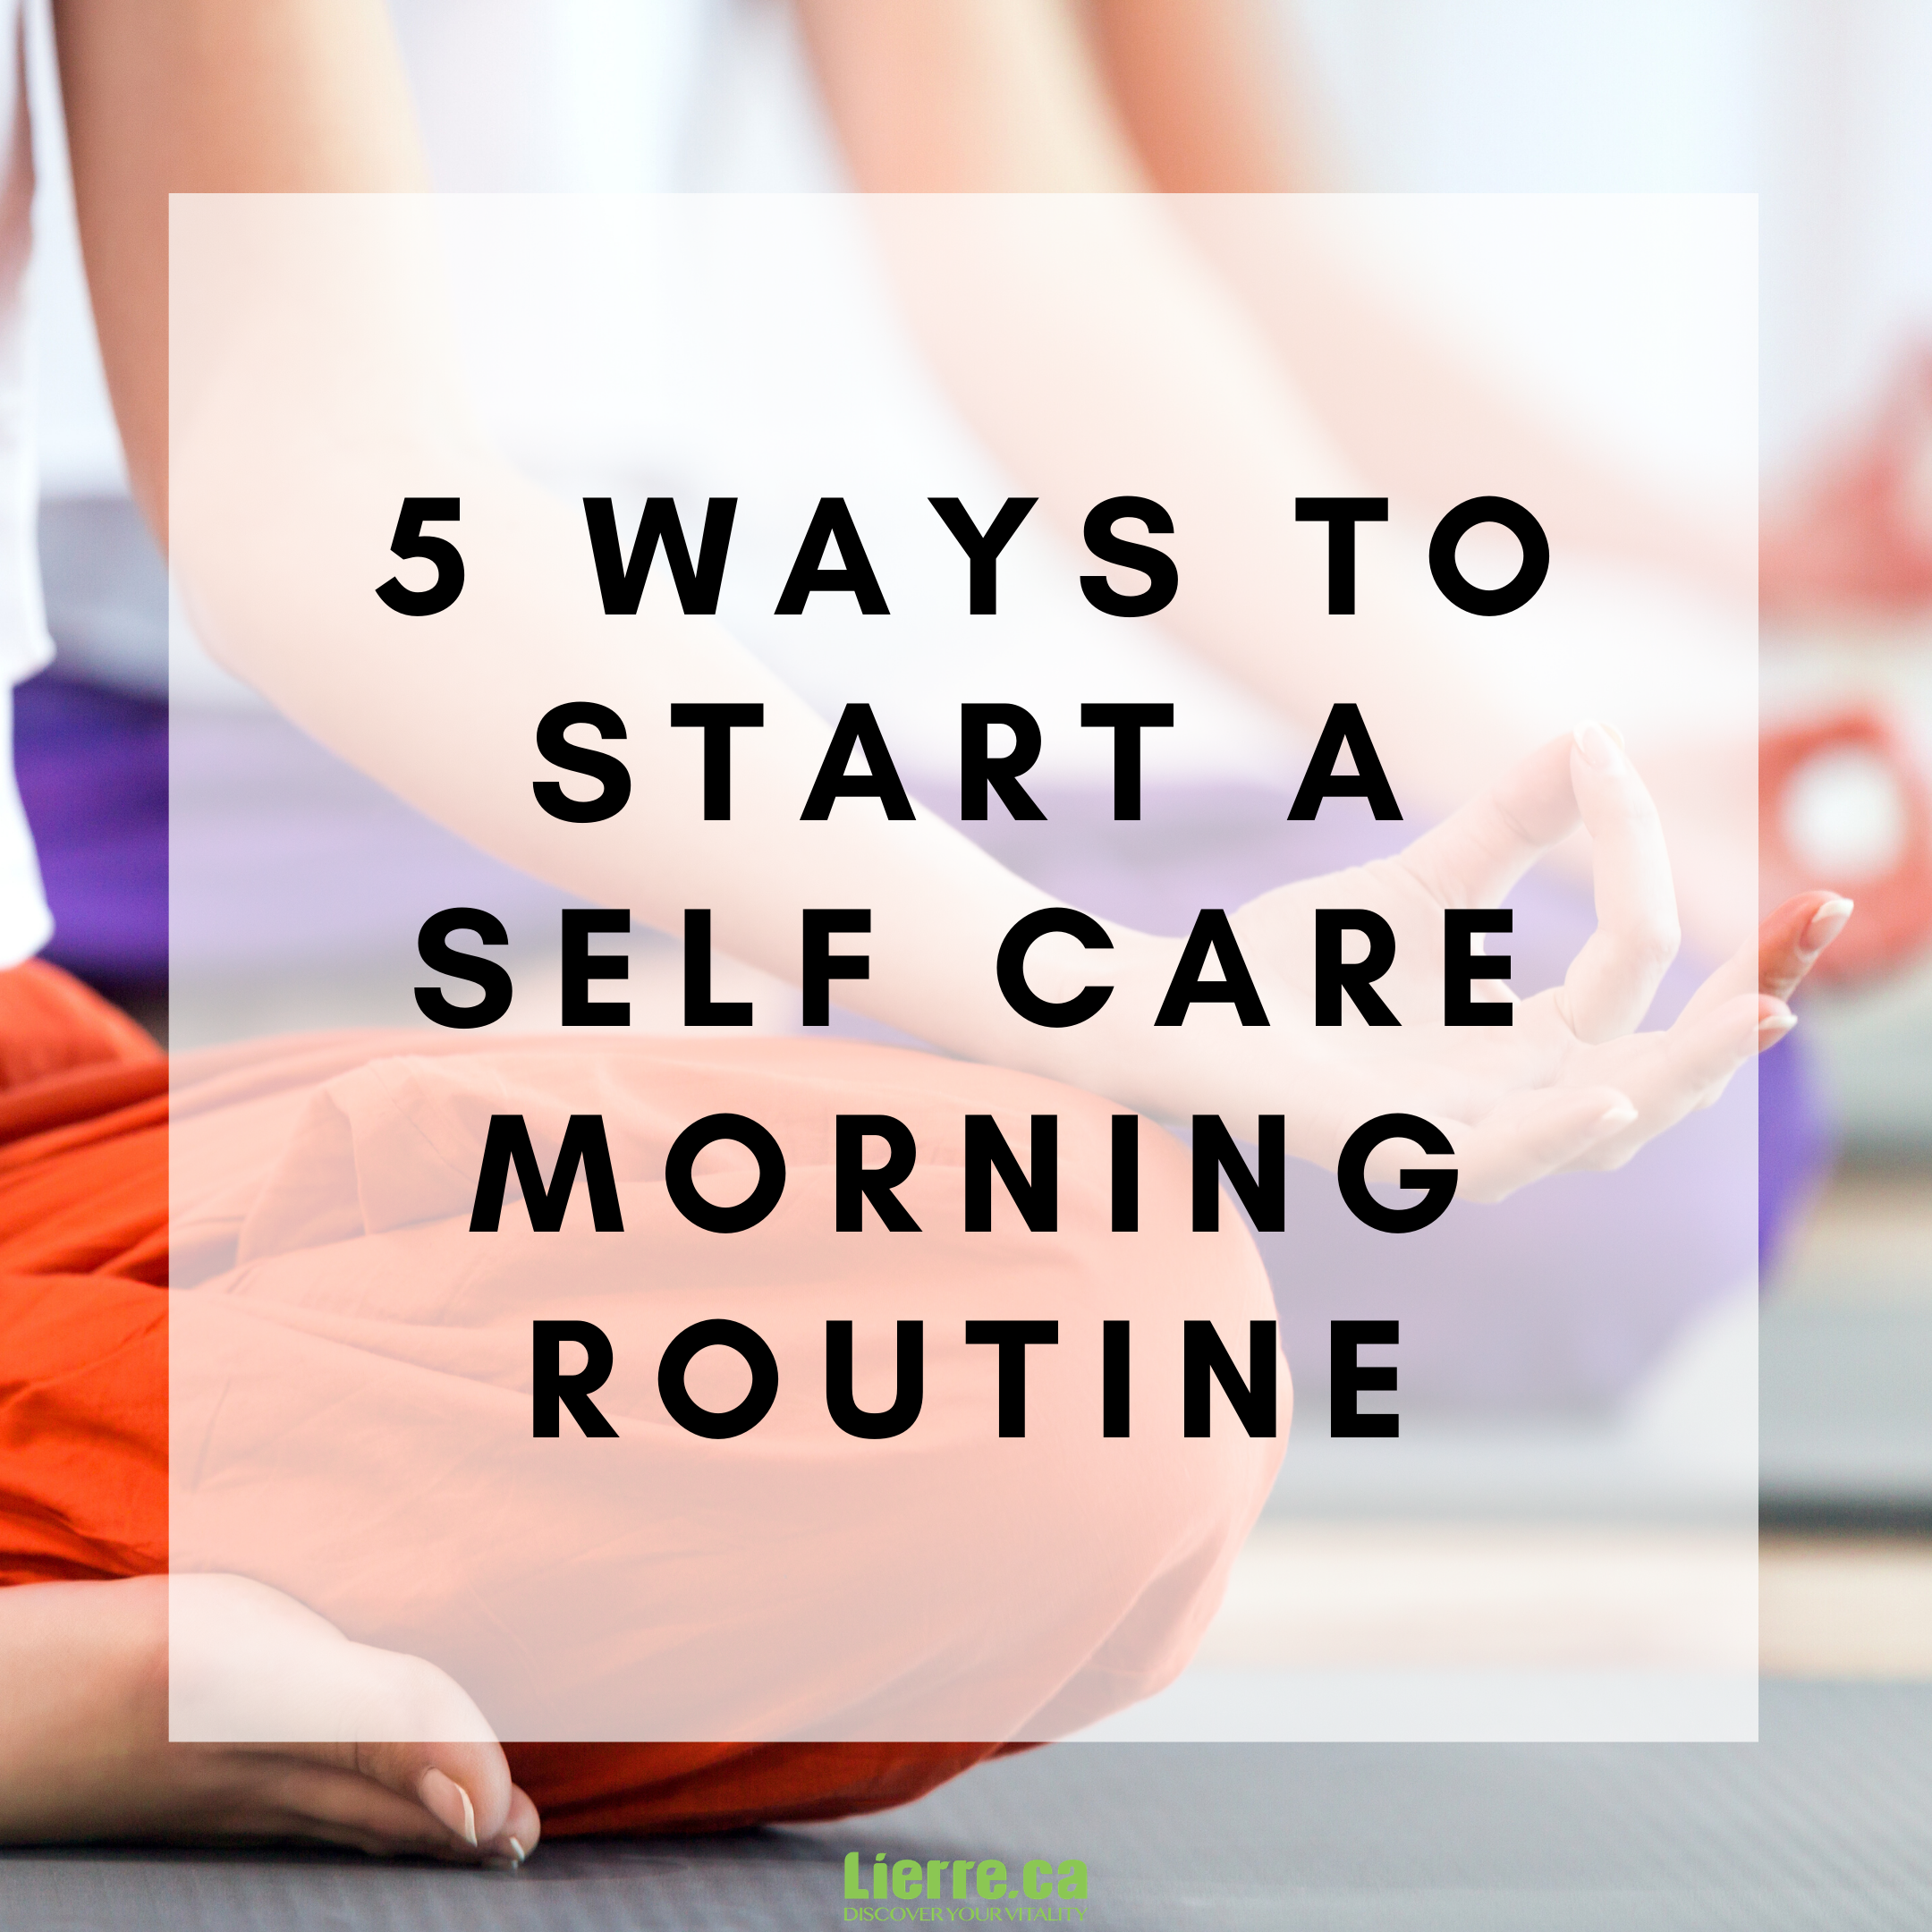 5 Ways to Start a Self Care Morning Routine from Lierre.ca Canada - New Years Resolution ideas 2020